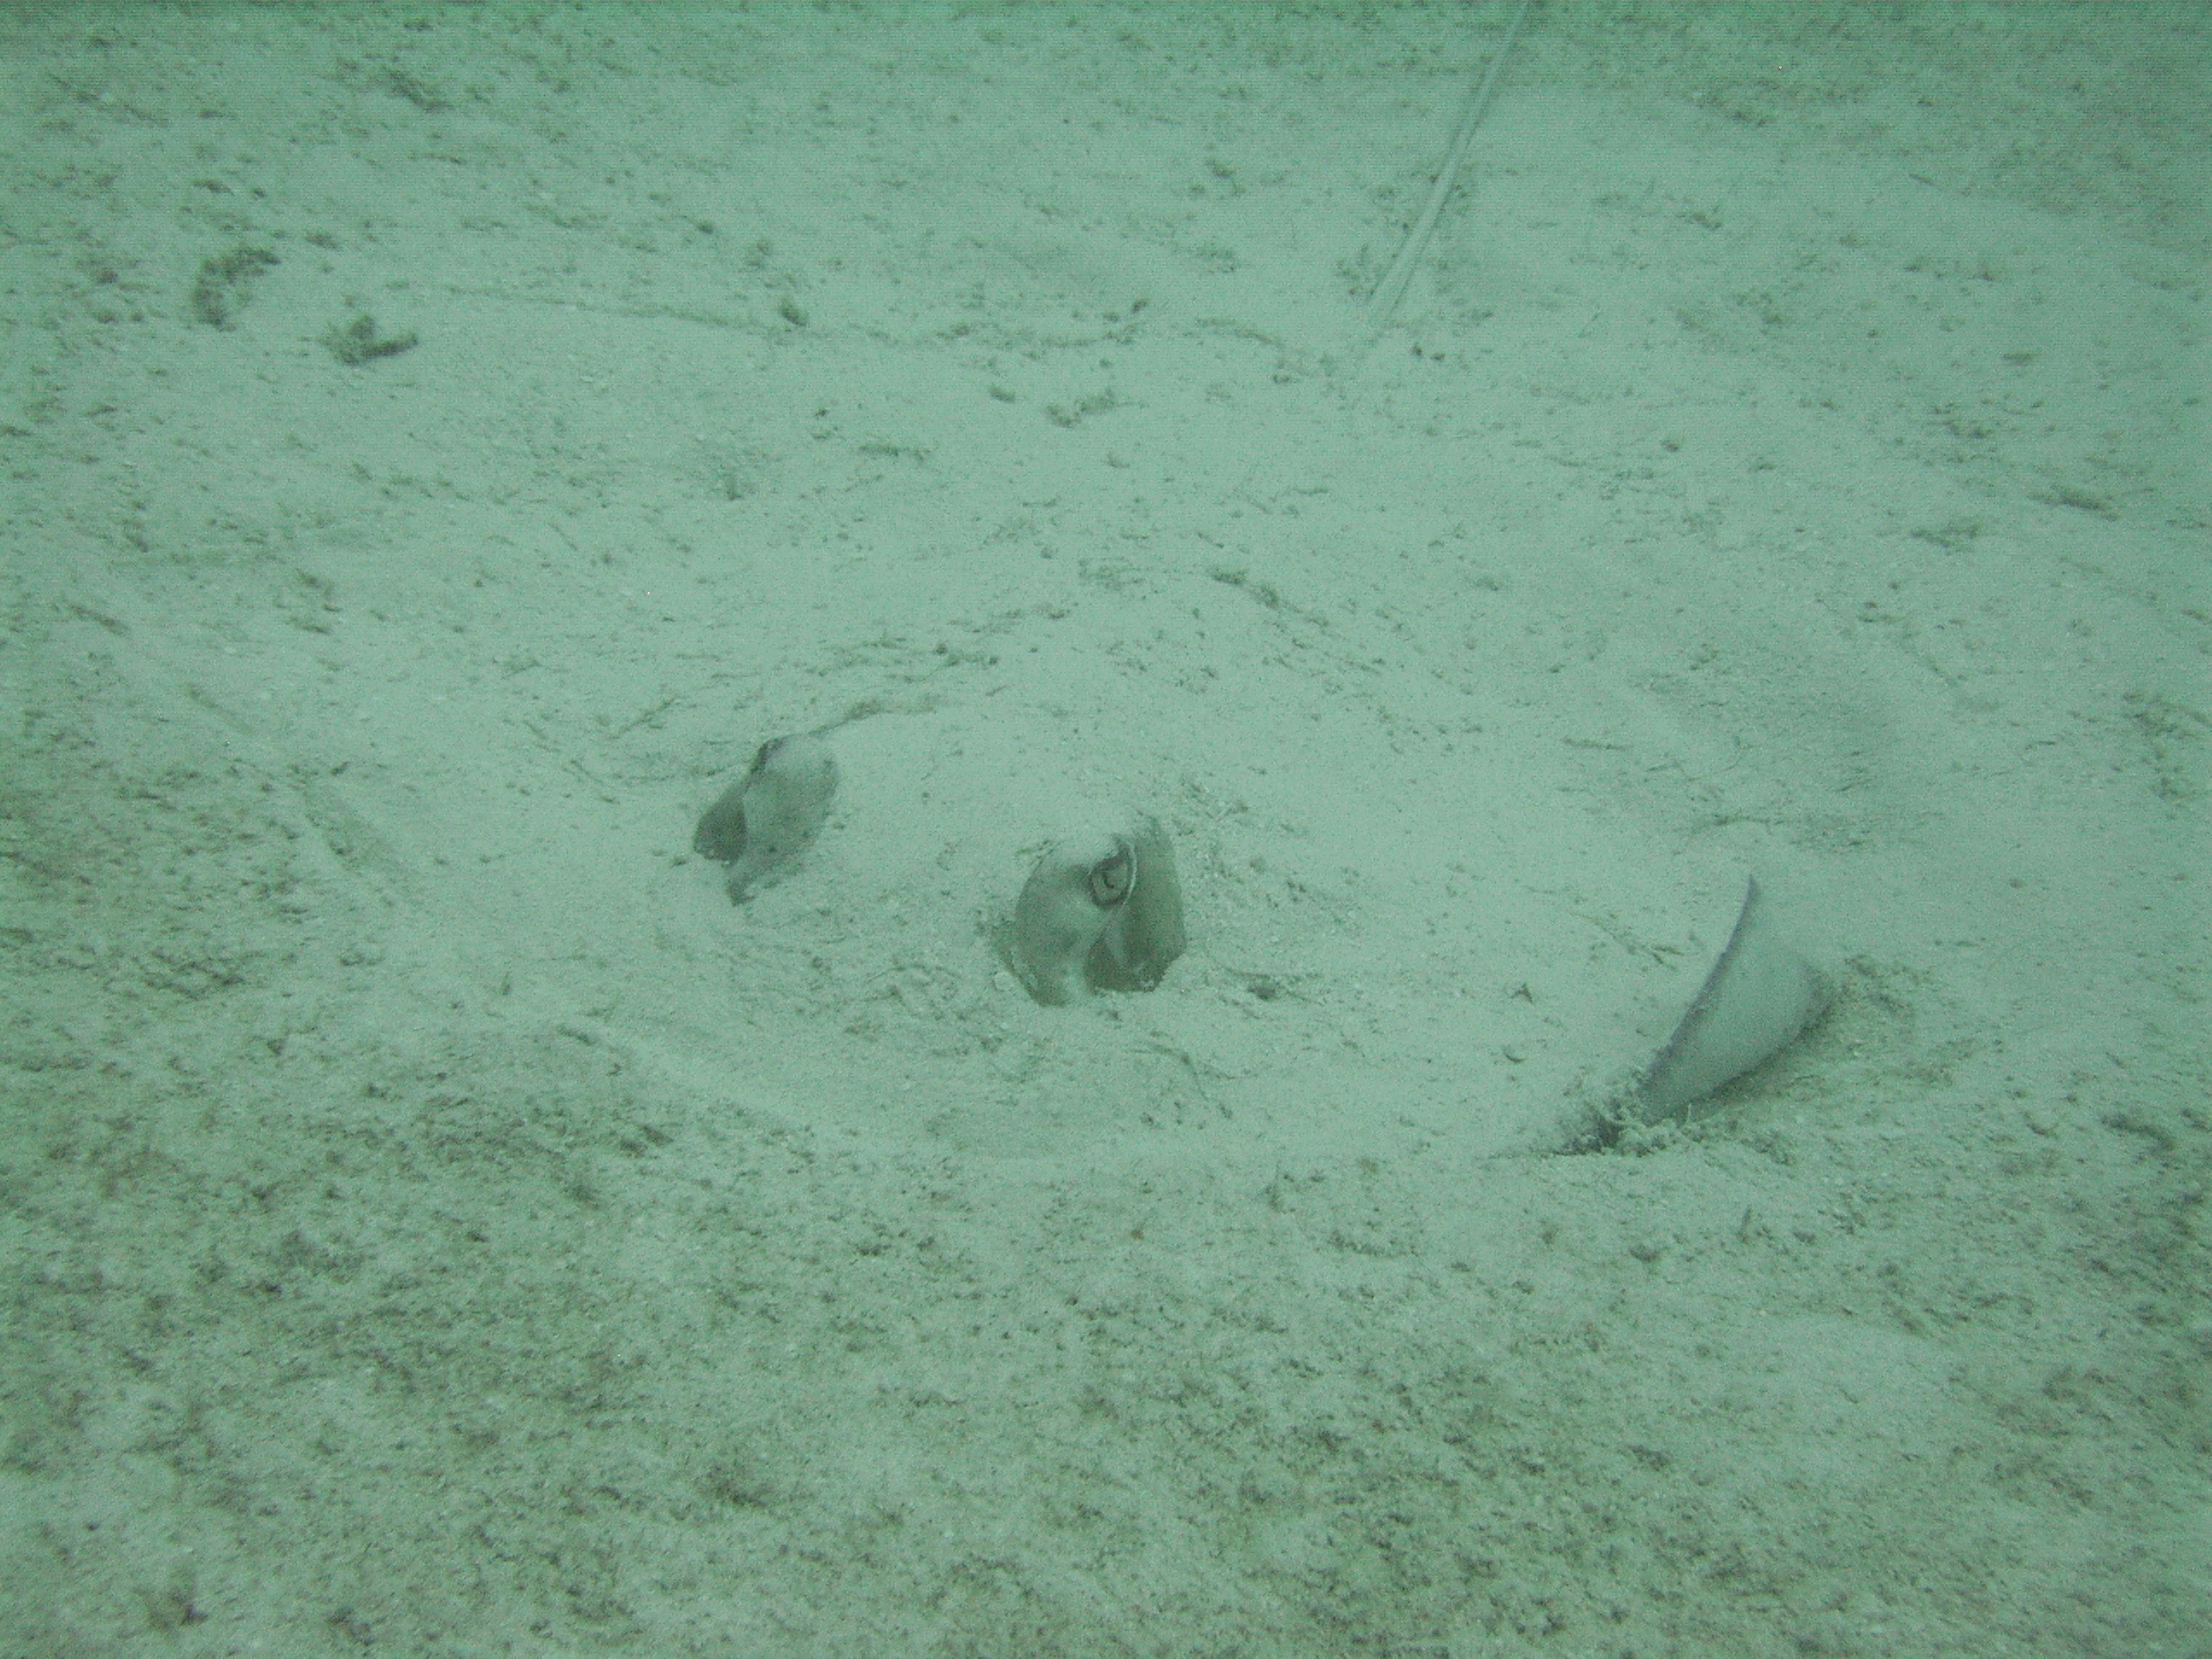 Southern stingray about to ride from the sand